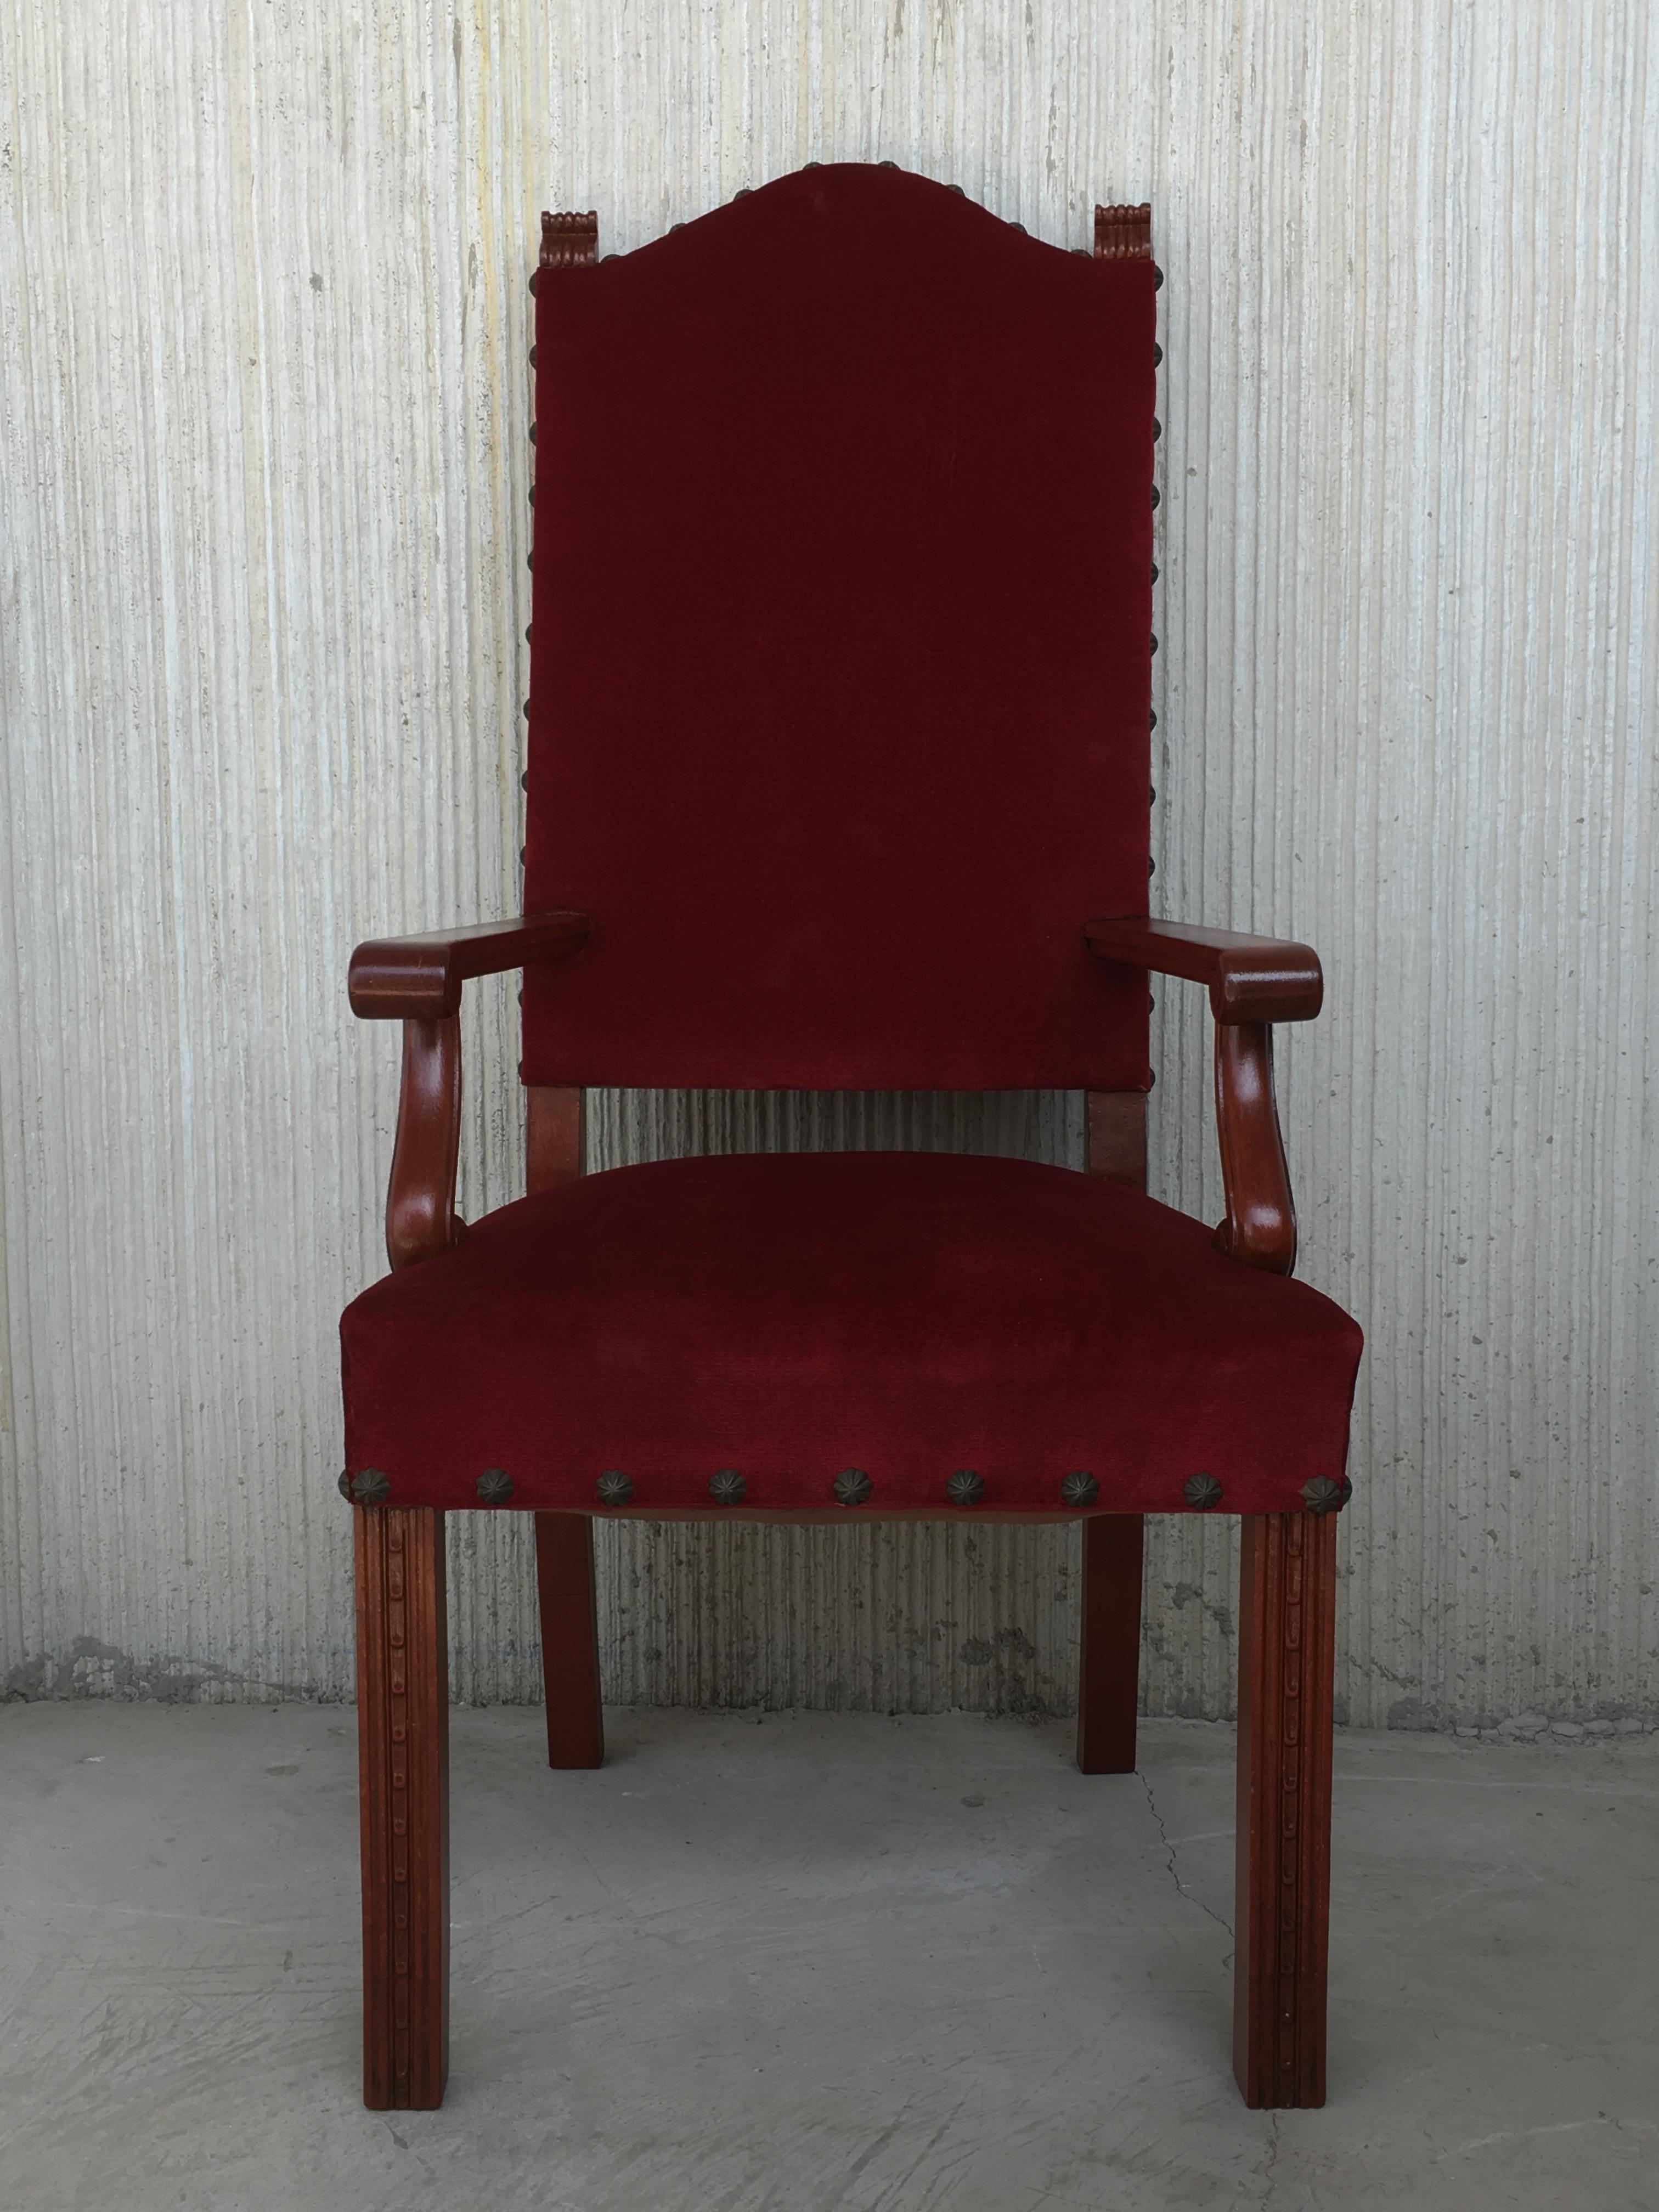 Baroque Revival 19th Century Spanish Revival High Back Armchair with Red Velvet Upholstery For Sale